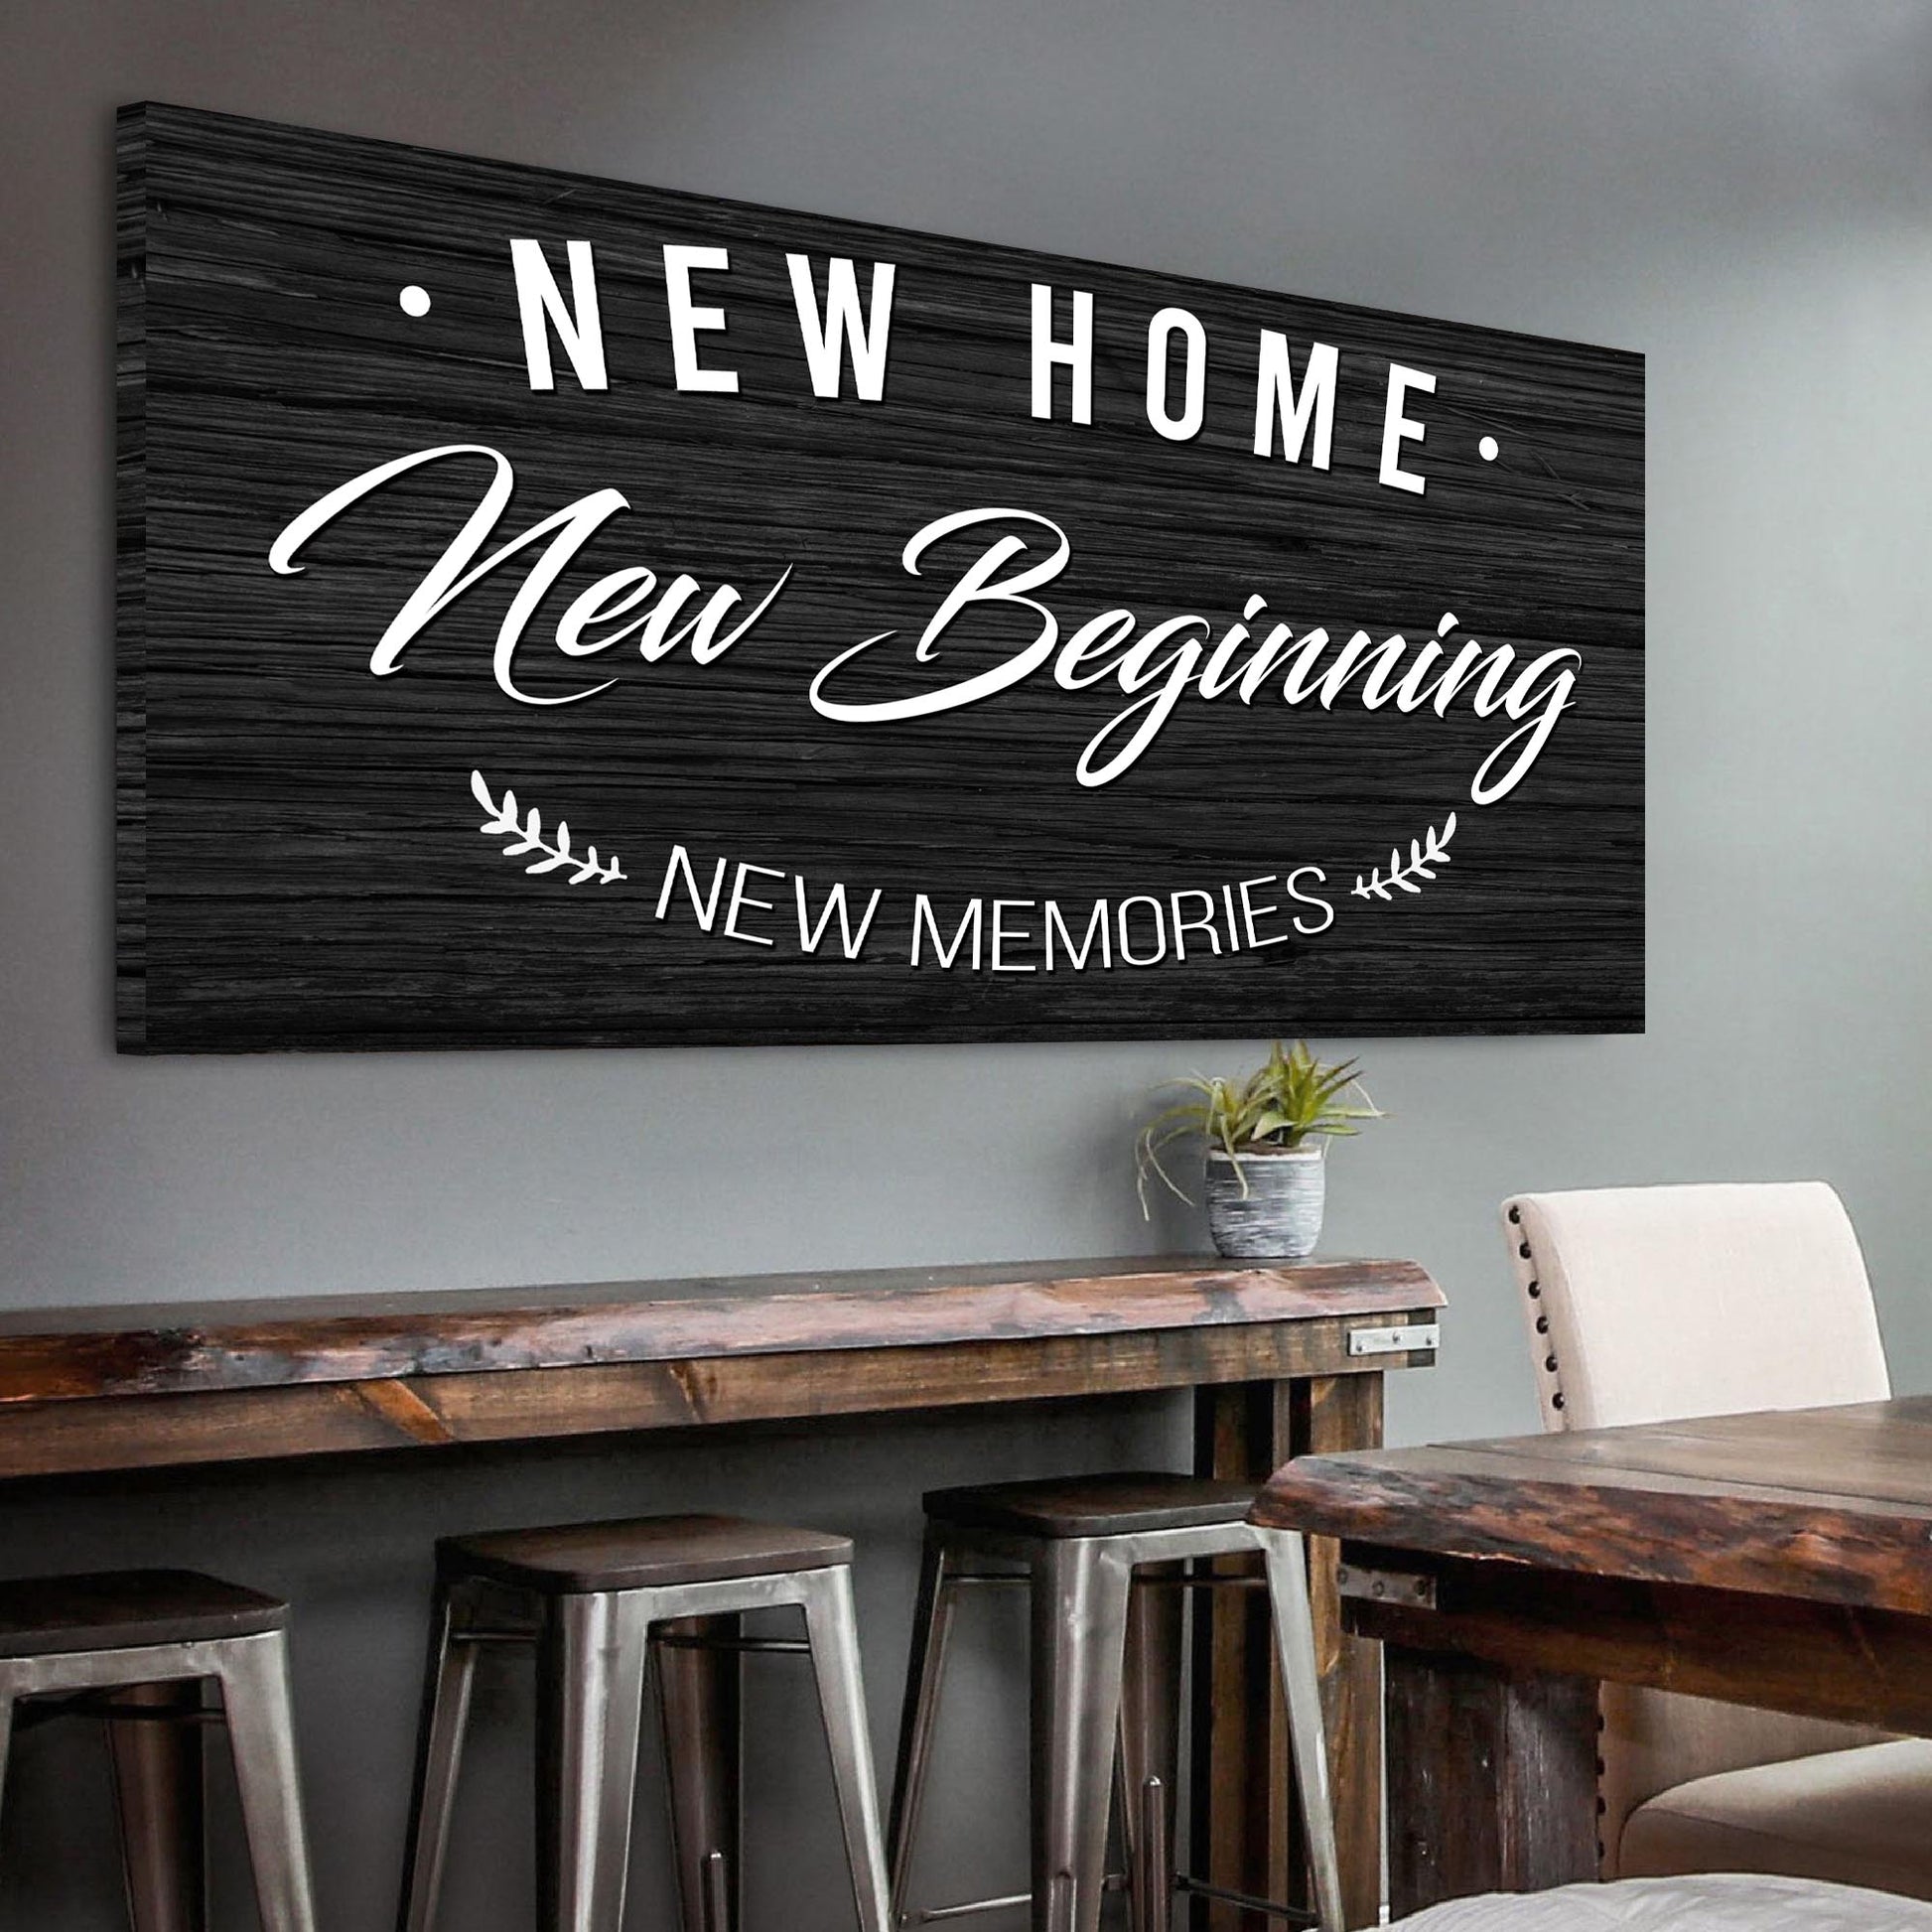 New Home New Beginning Sign II - Image by Tailored Canvases